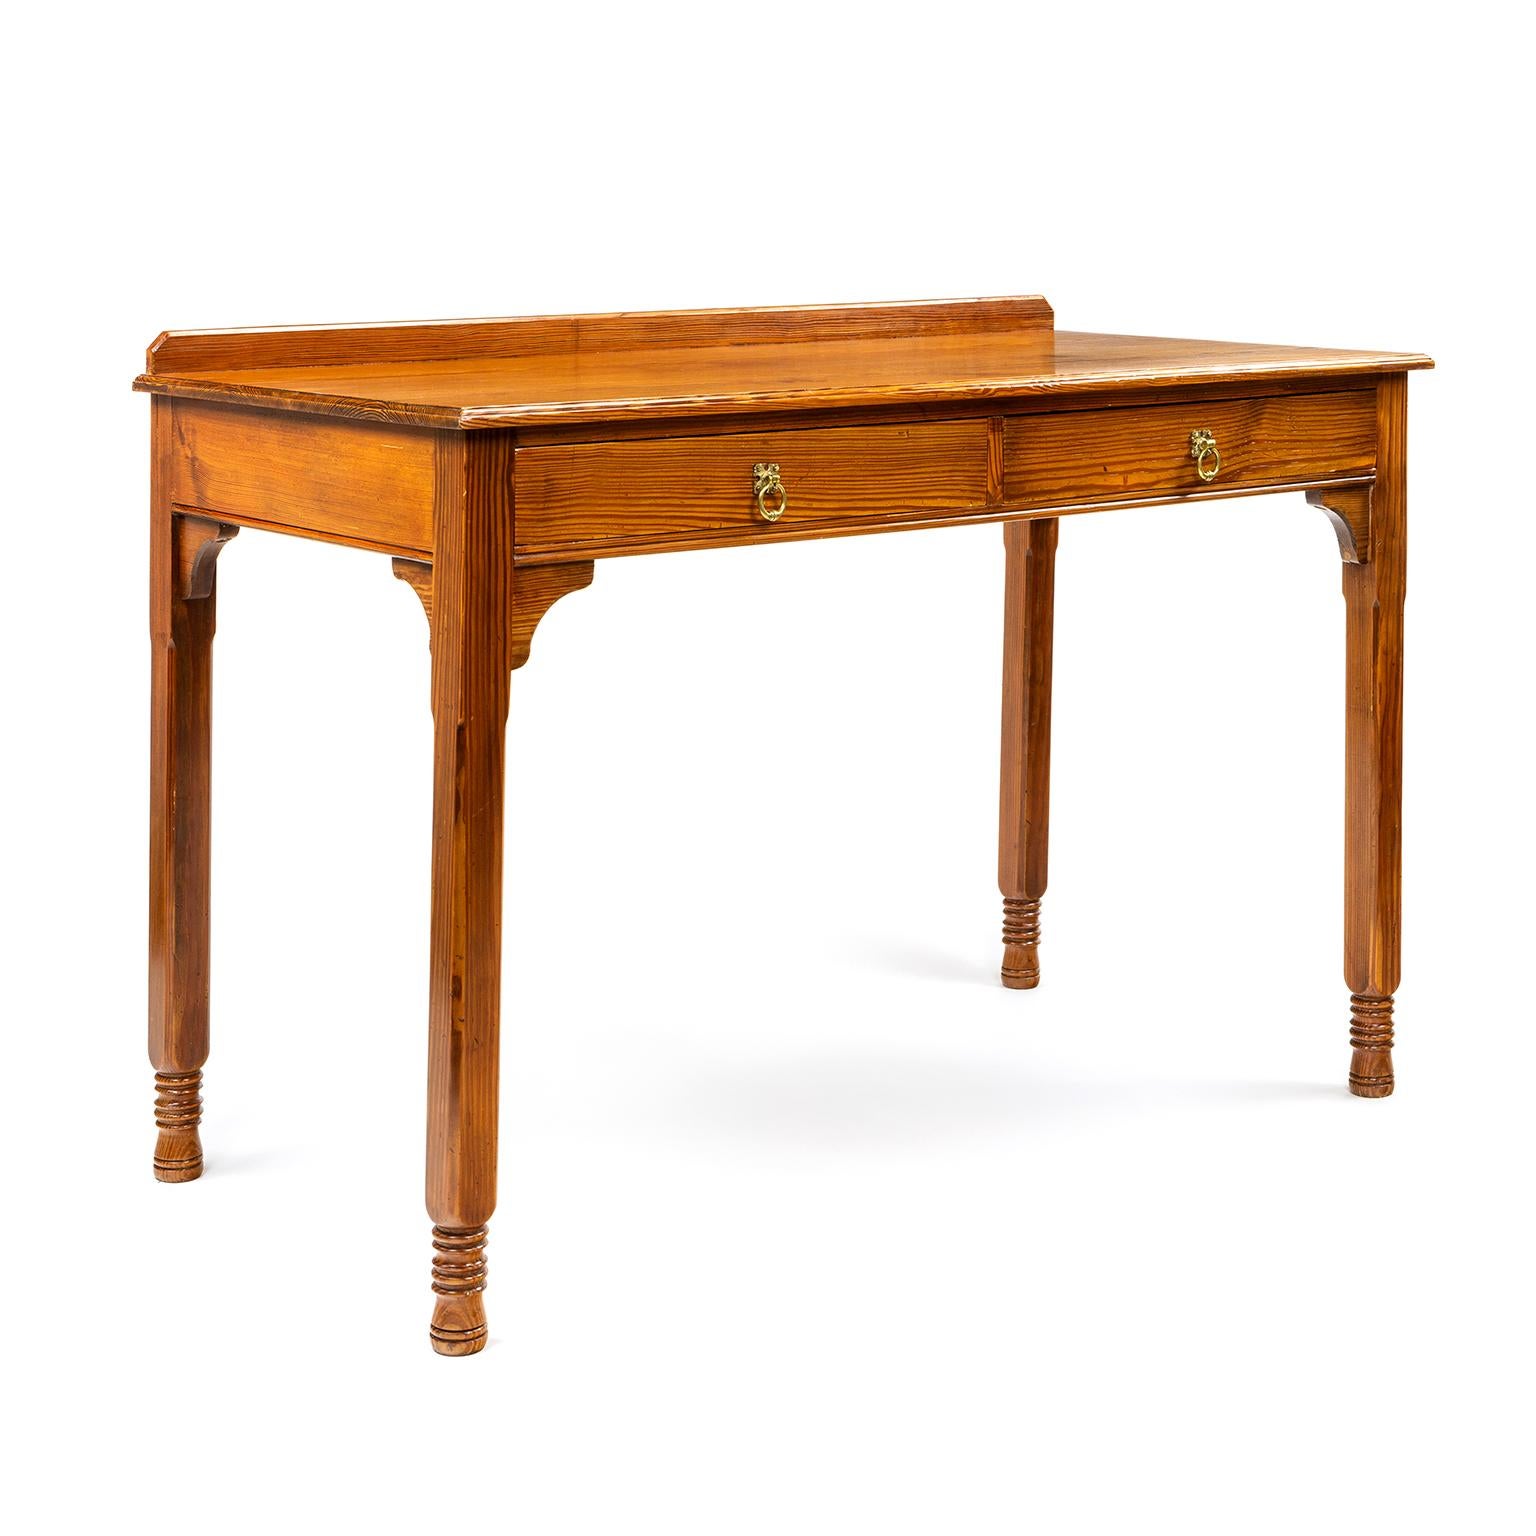 Gillows late 19th C pine side or hall table, it has two draws and is signed Gillow Lancaster.

Gillows of Lancaster and London, also known as Gillow & Co., was an English furniture making firm based in Lancaster, Lancashire, and in London. It was